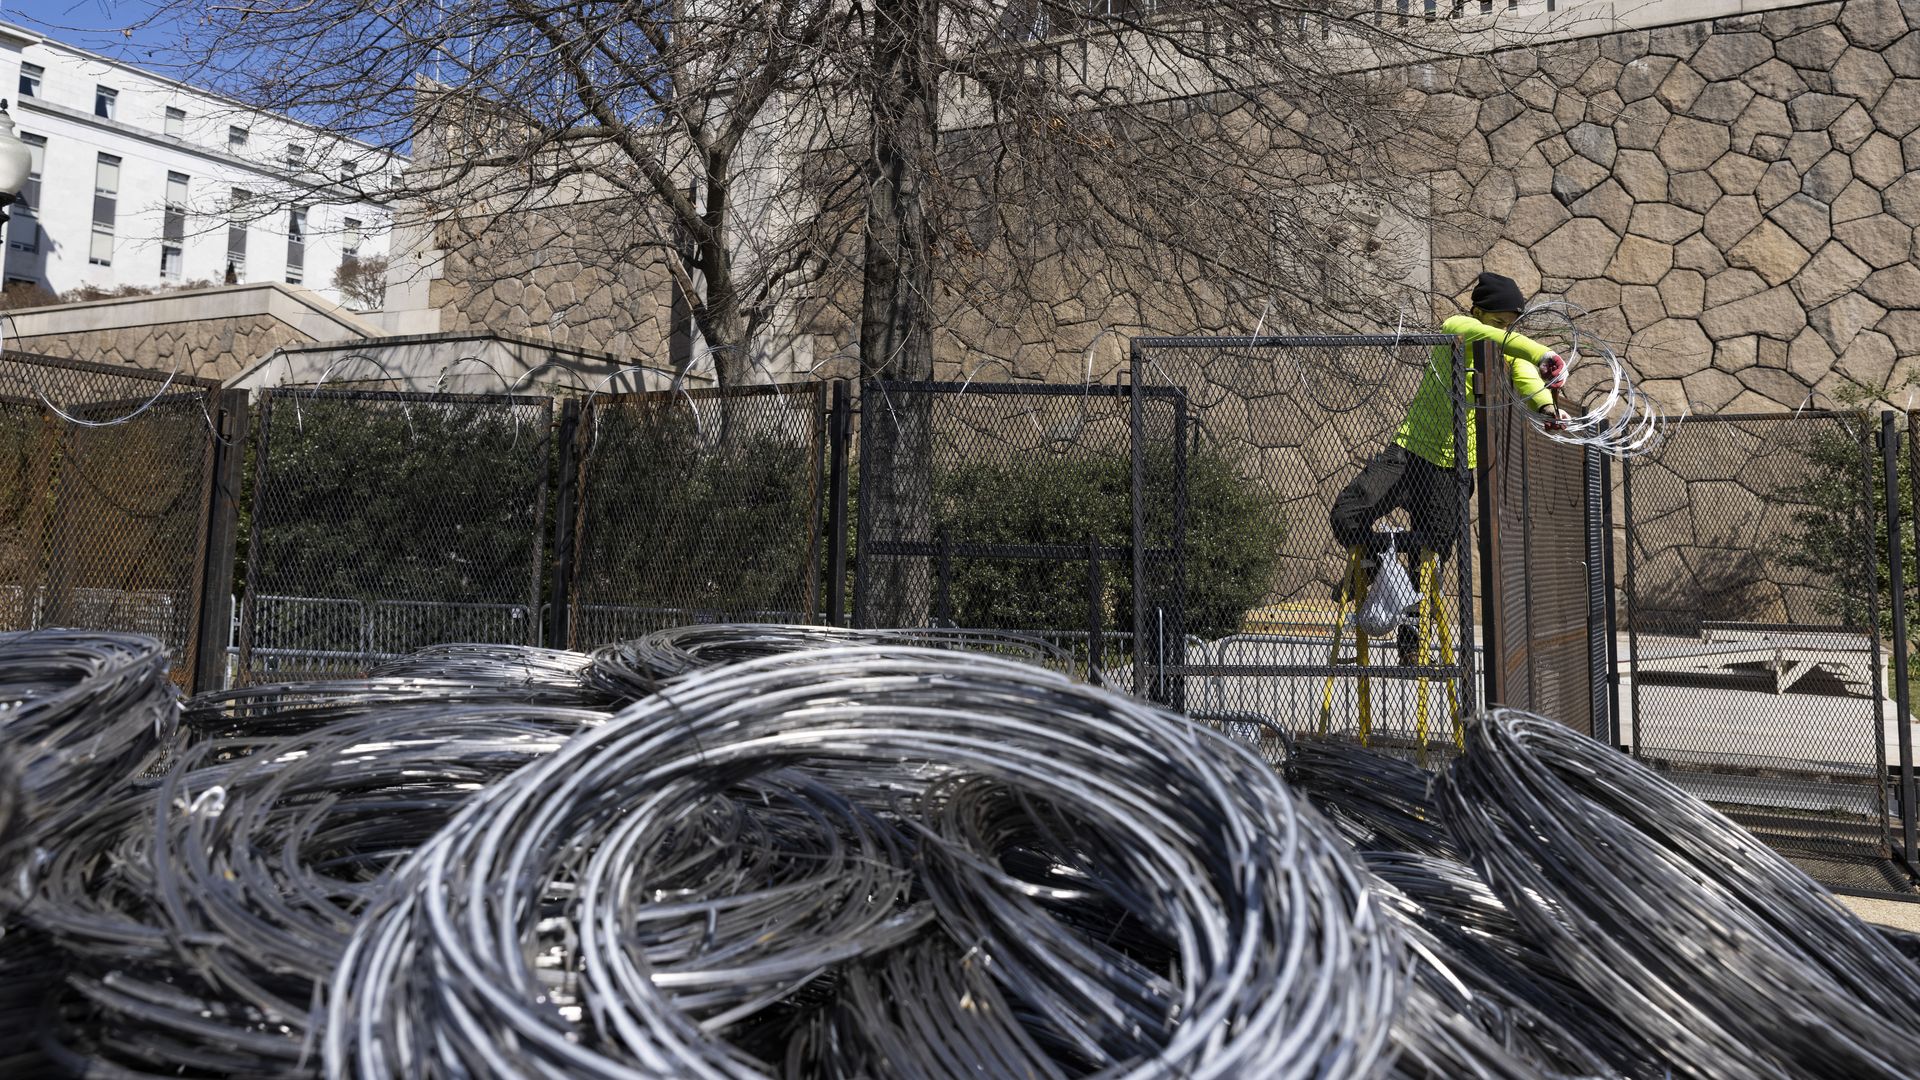 A worker is seen dismanting the barbed wire that had been placed atop extra fencing around the Capitol complex.